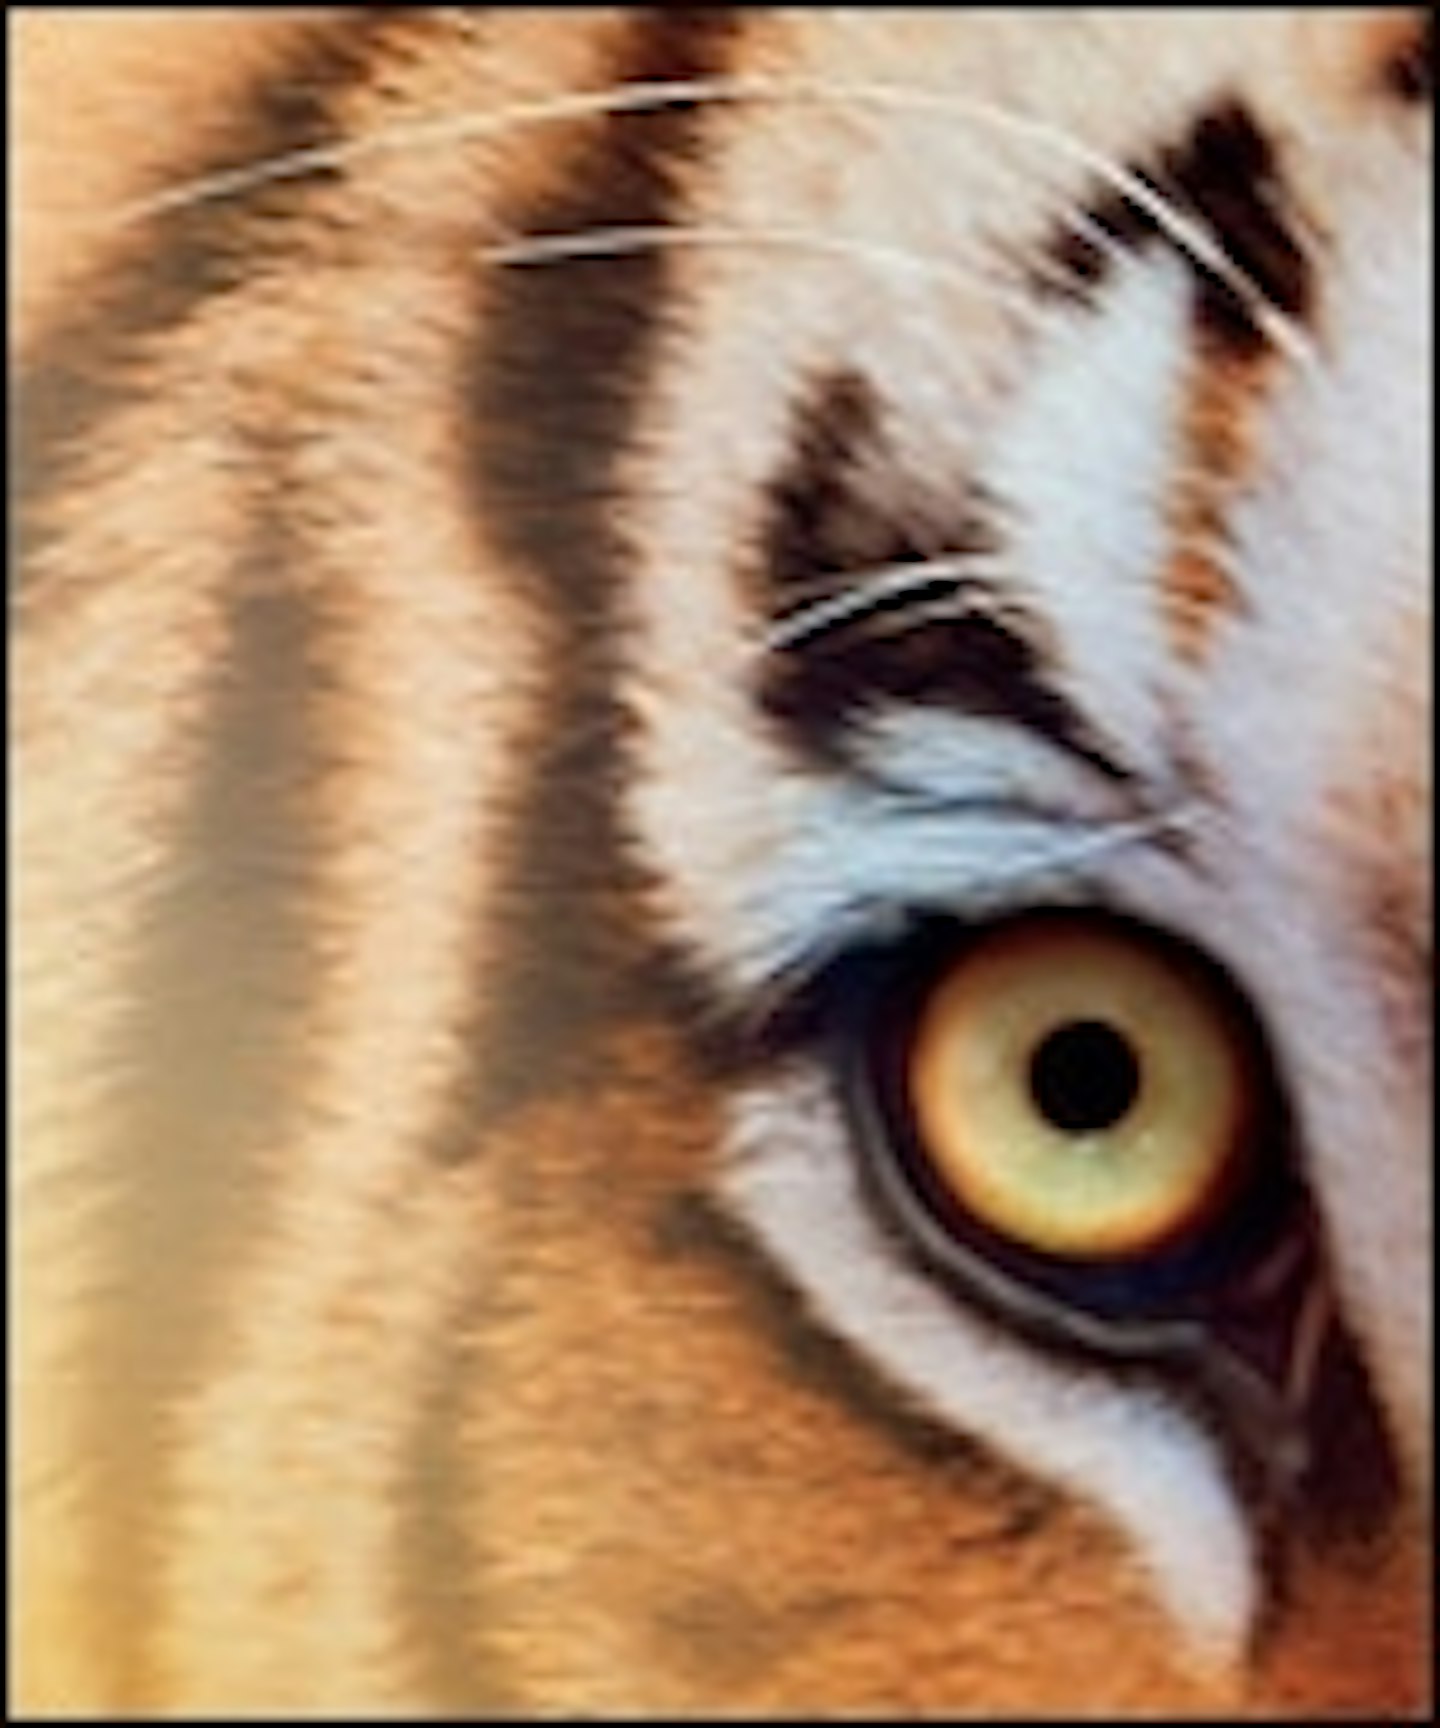 Two New Posters For Ang Lee's Life Of Pi